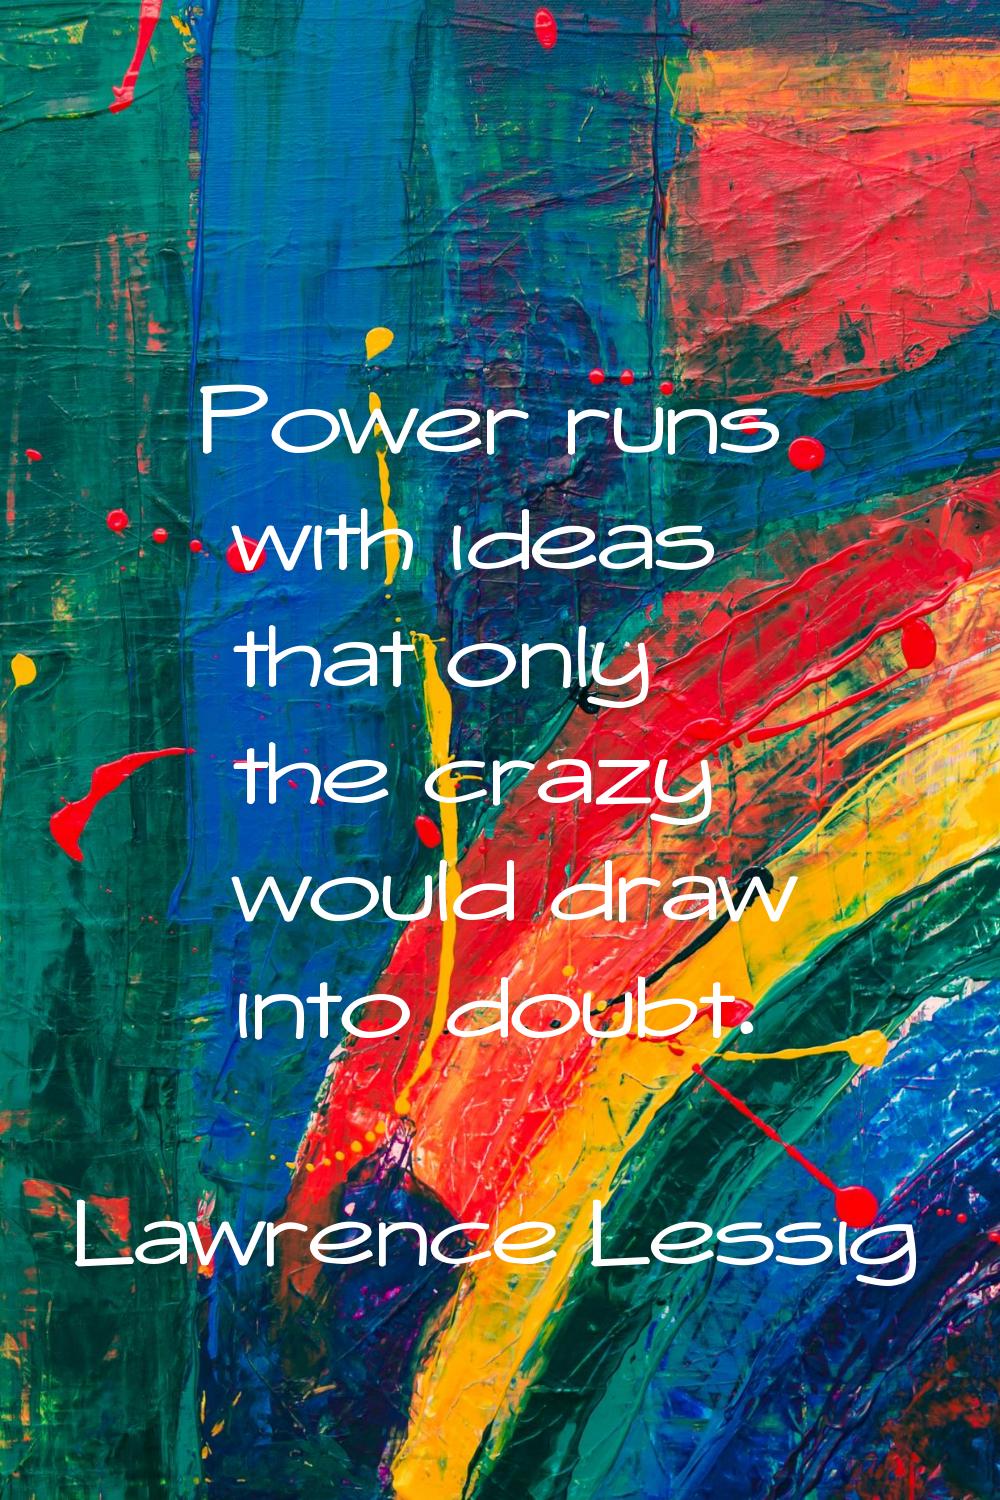 Power runs with ideas that only the crazy would draw into doubt.